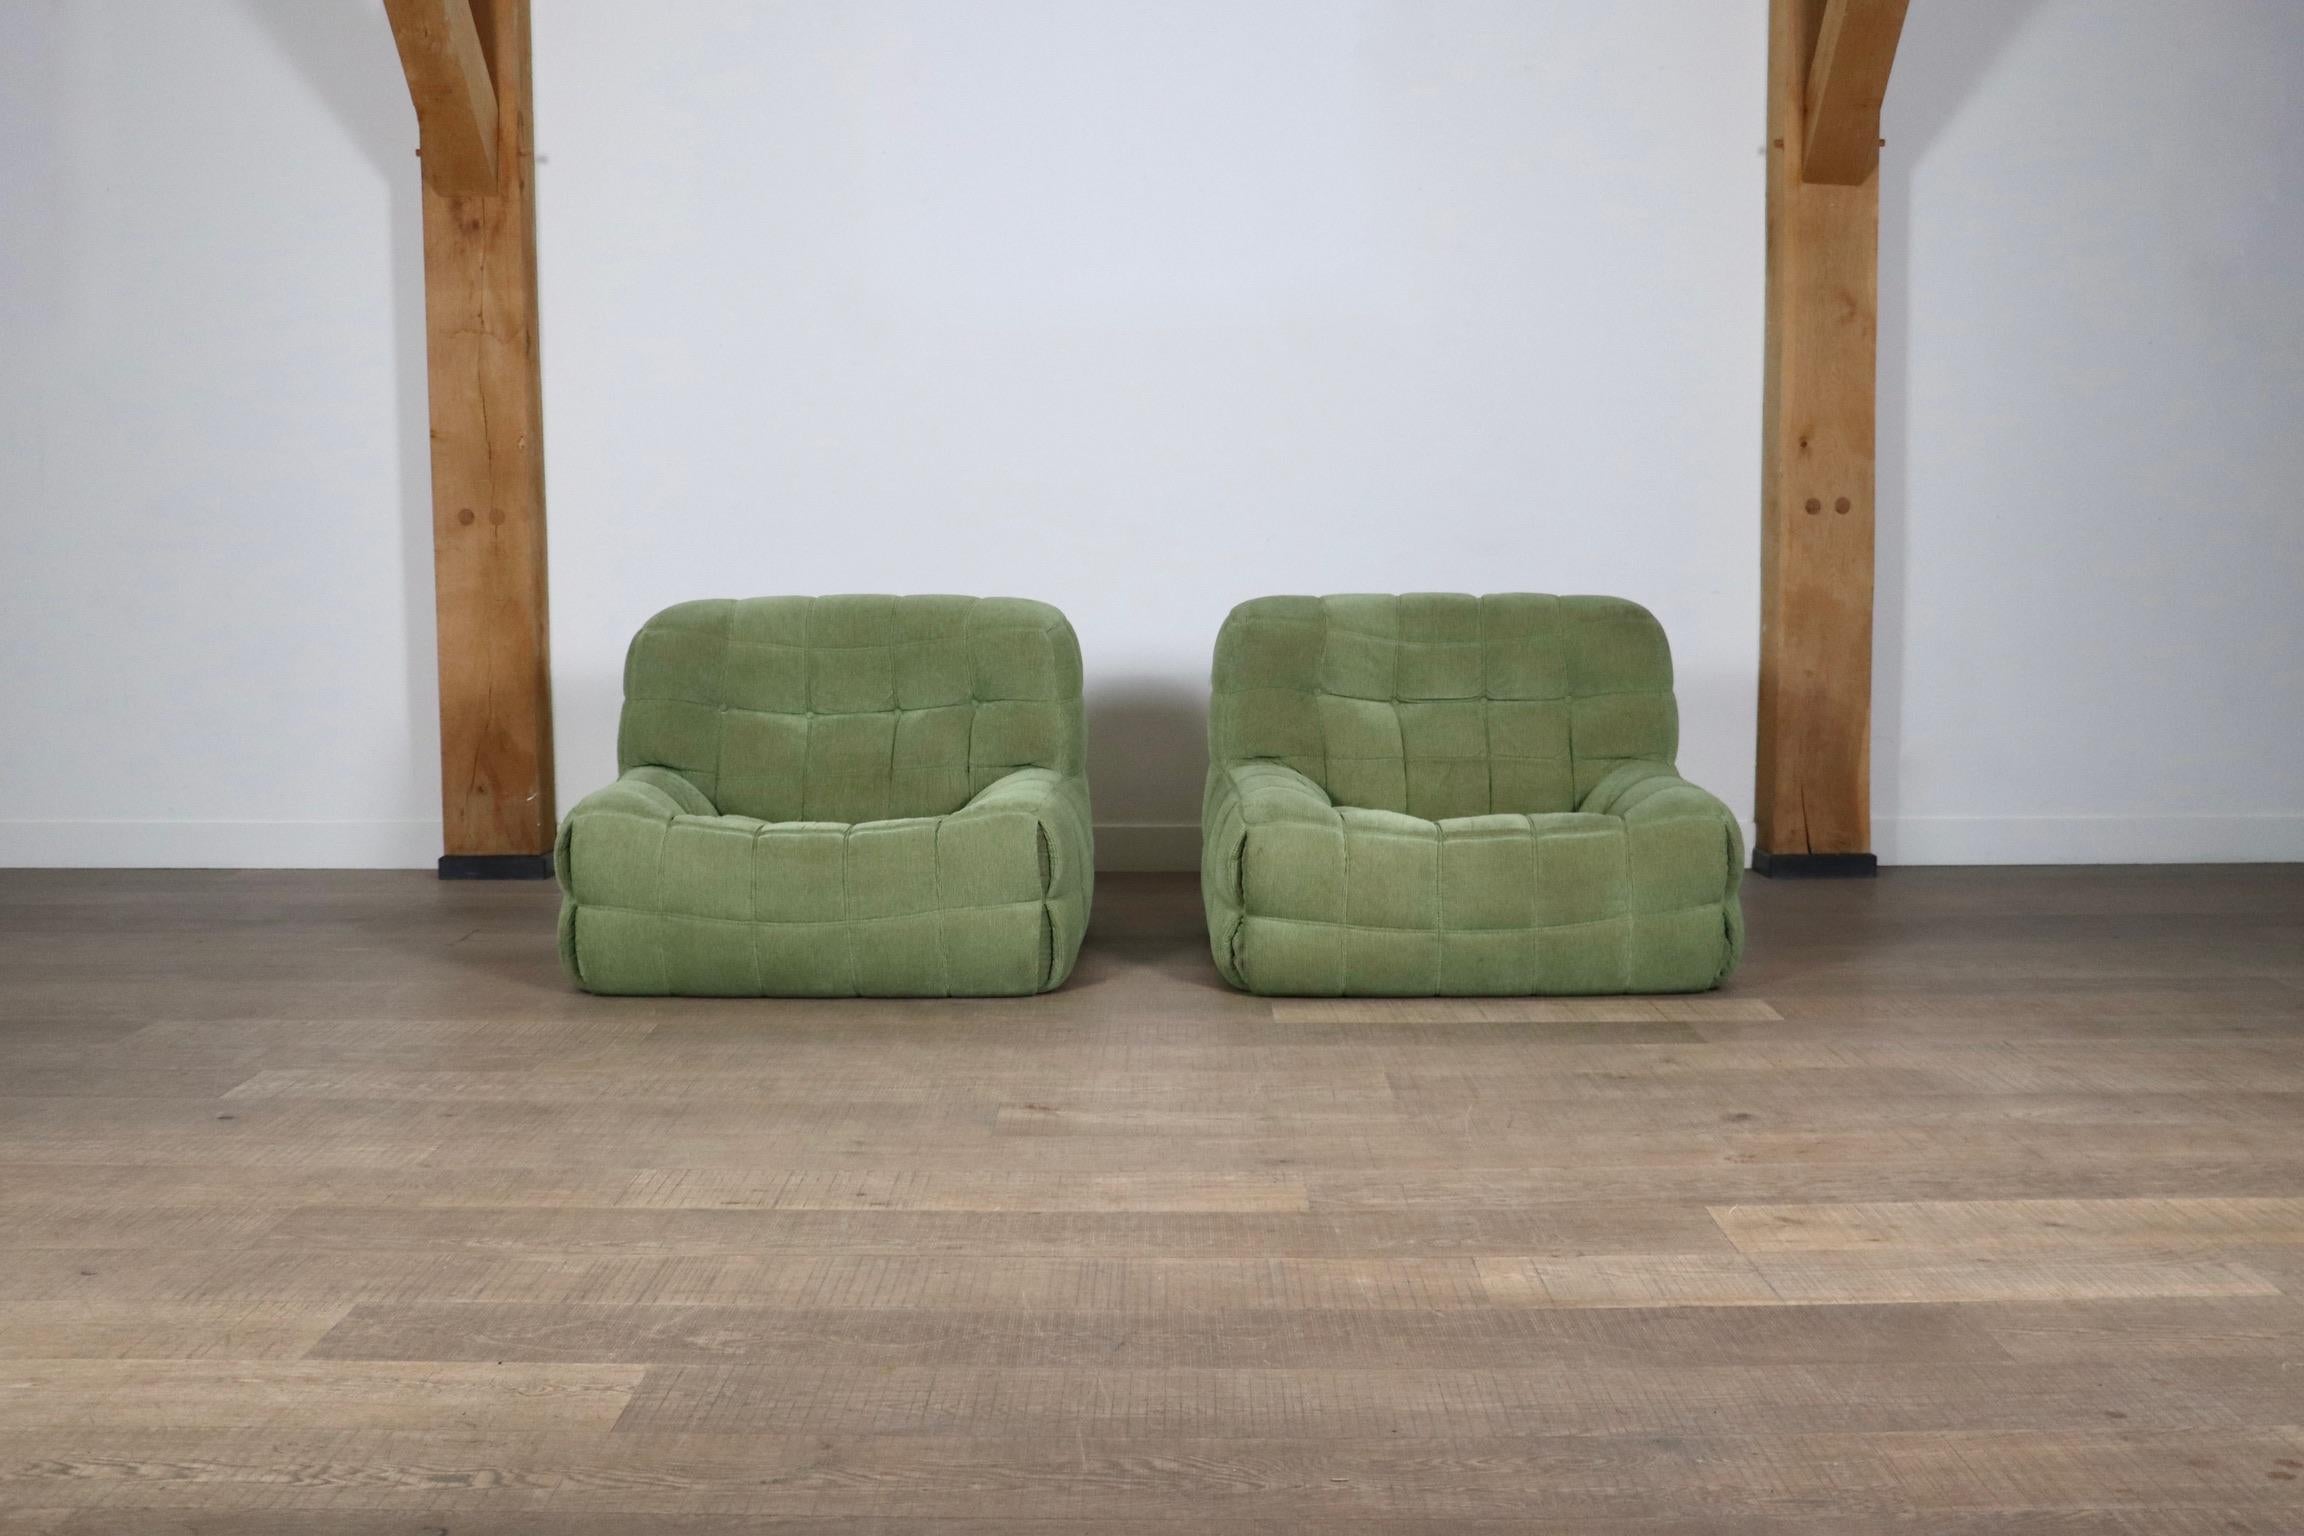 Amazing pair of original Ligne Roset Kashima lounge chairs by Michel Ducaroy, France 1970s.
The nice lightweight design is both very comfortable and fun to look at in the beautiful original green velvet upholstery. The original fabric is in very